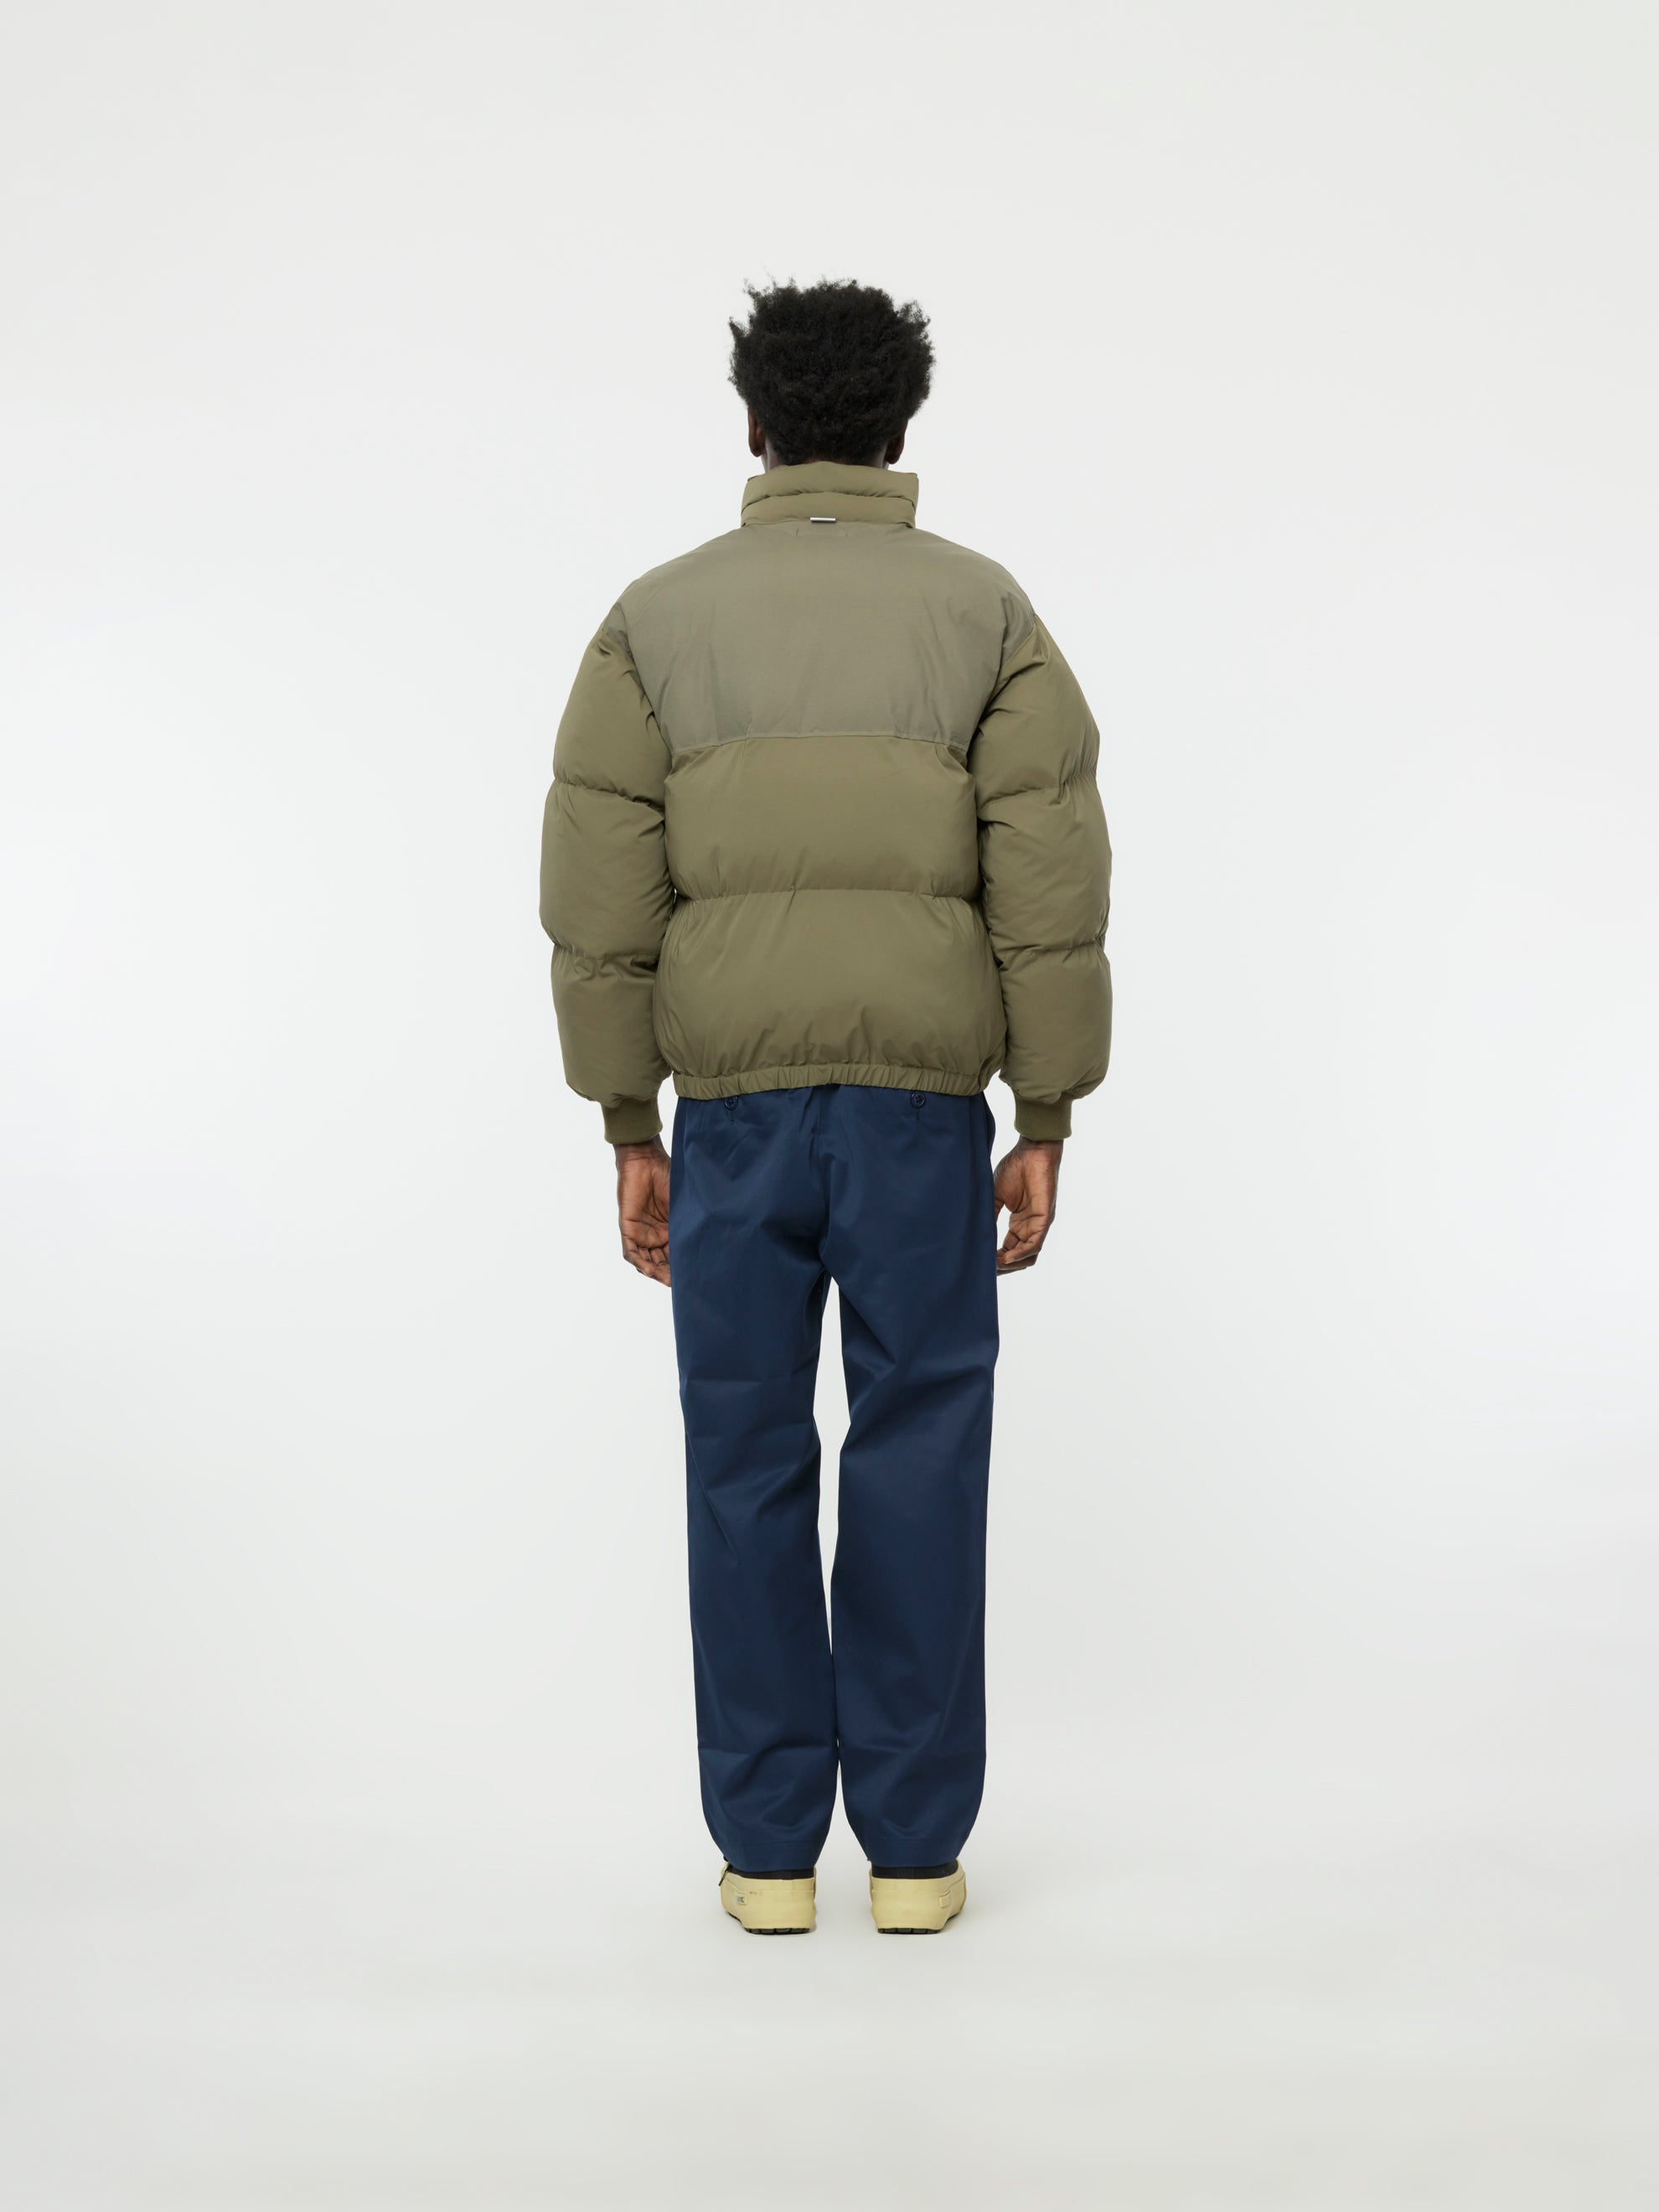 TTL / PULLOVER / JACKET / POLY. WEATHER. SIGN (Olive Drab)